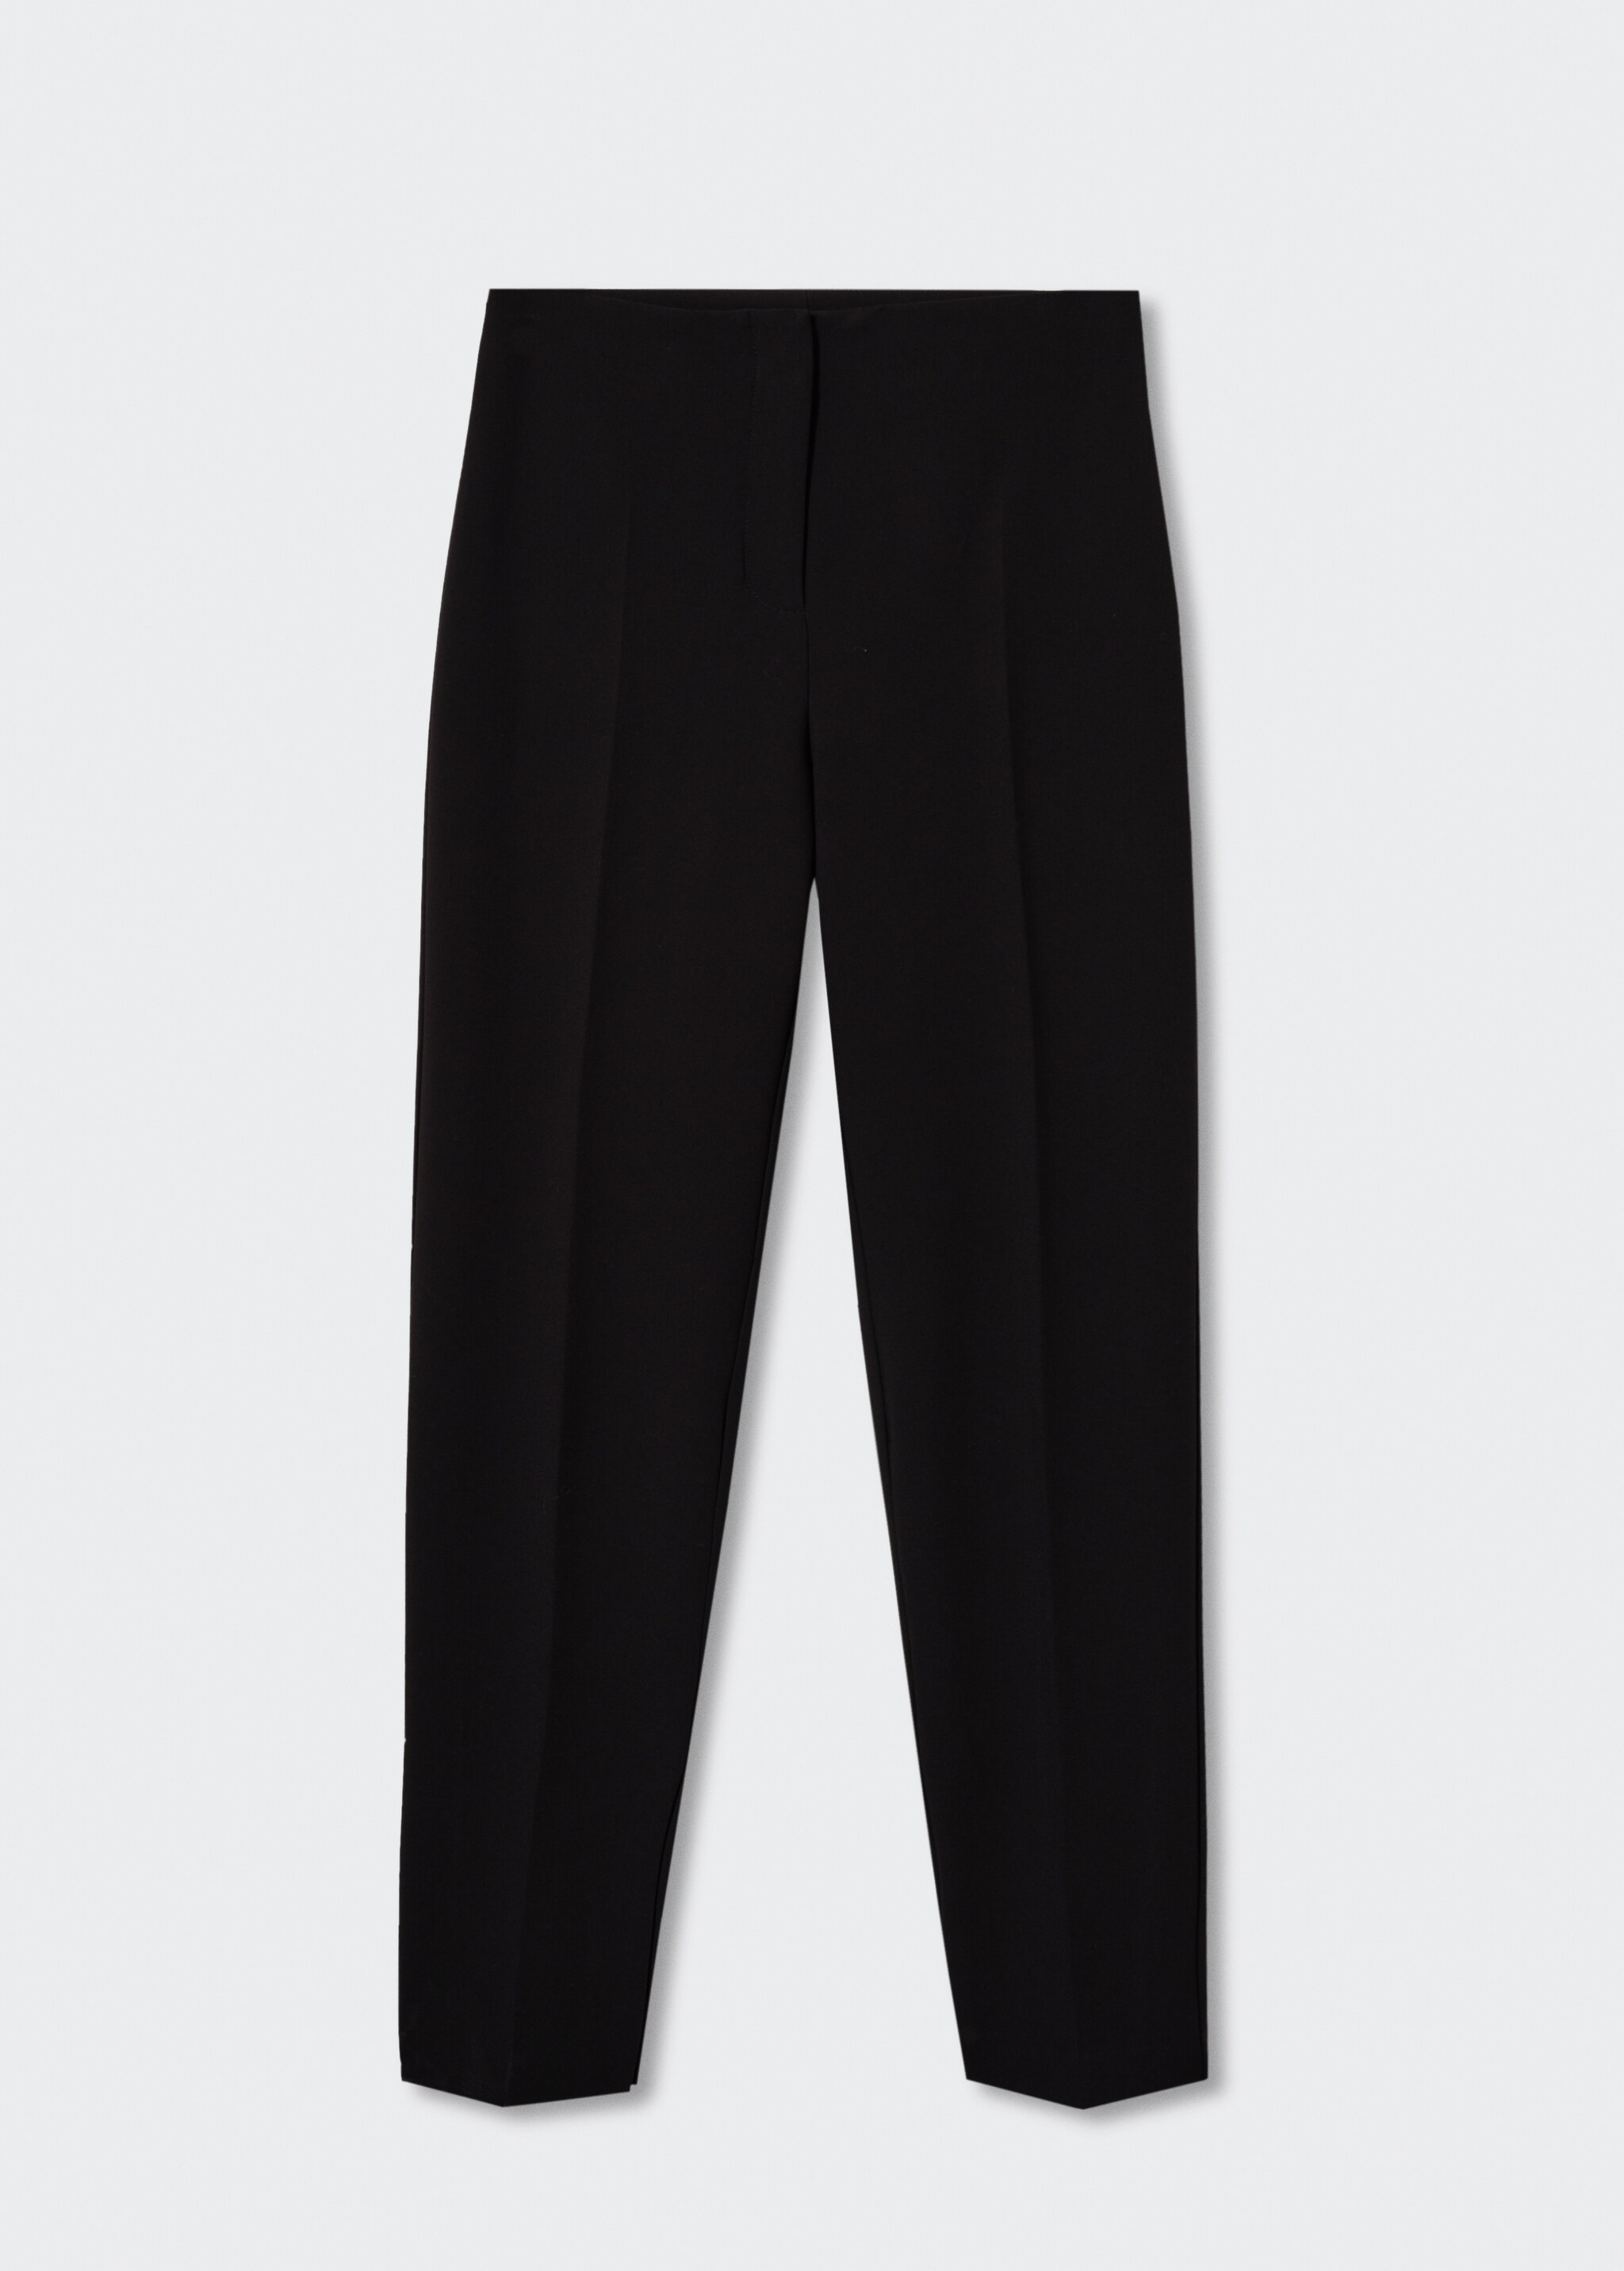 Slit hem trousers - Article without model